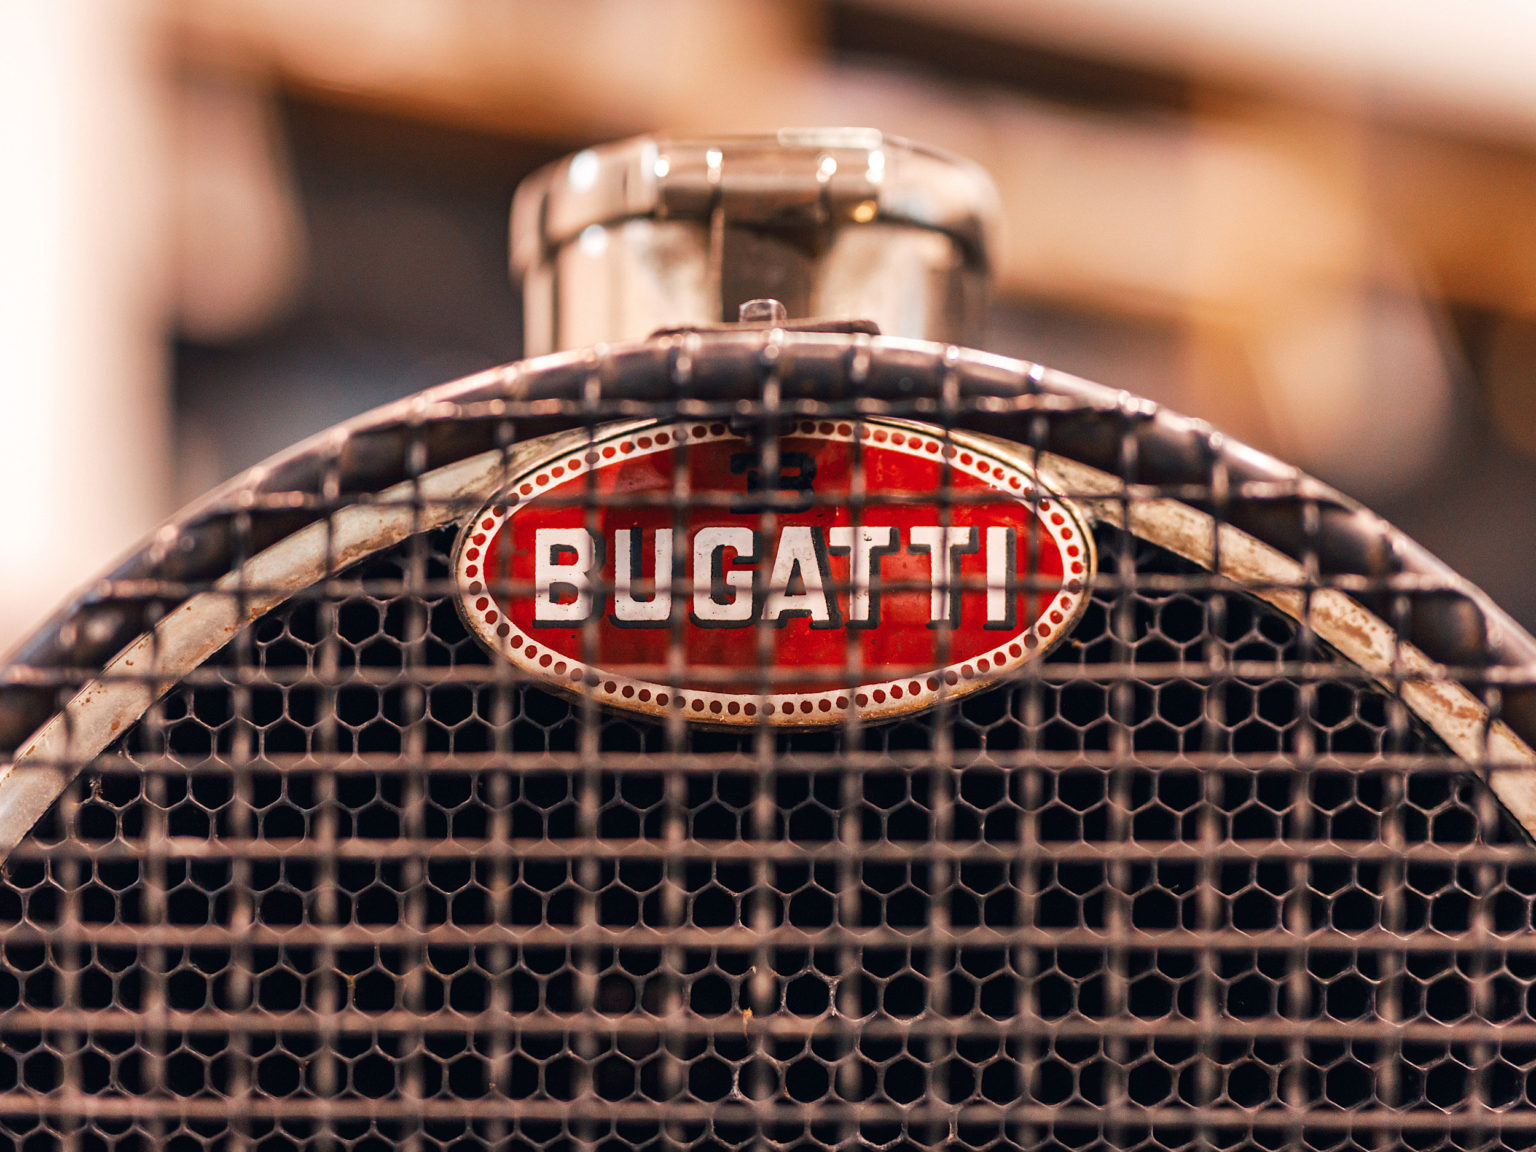 The Bugatti emblem is known as the Macaron